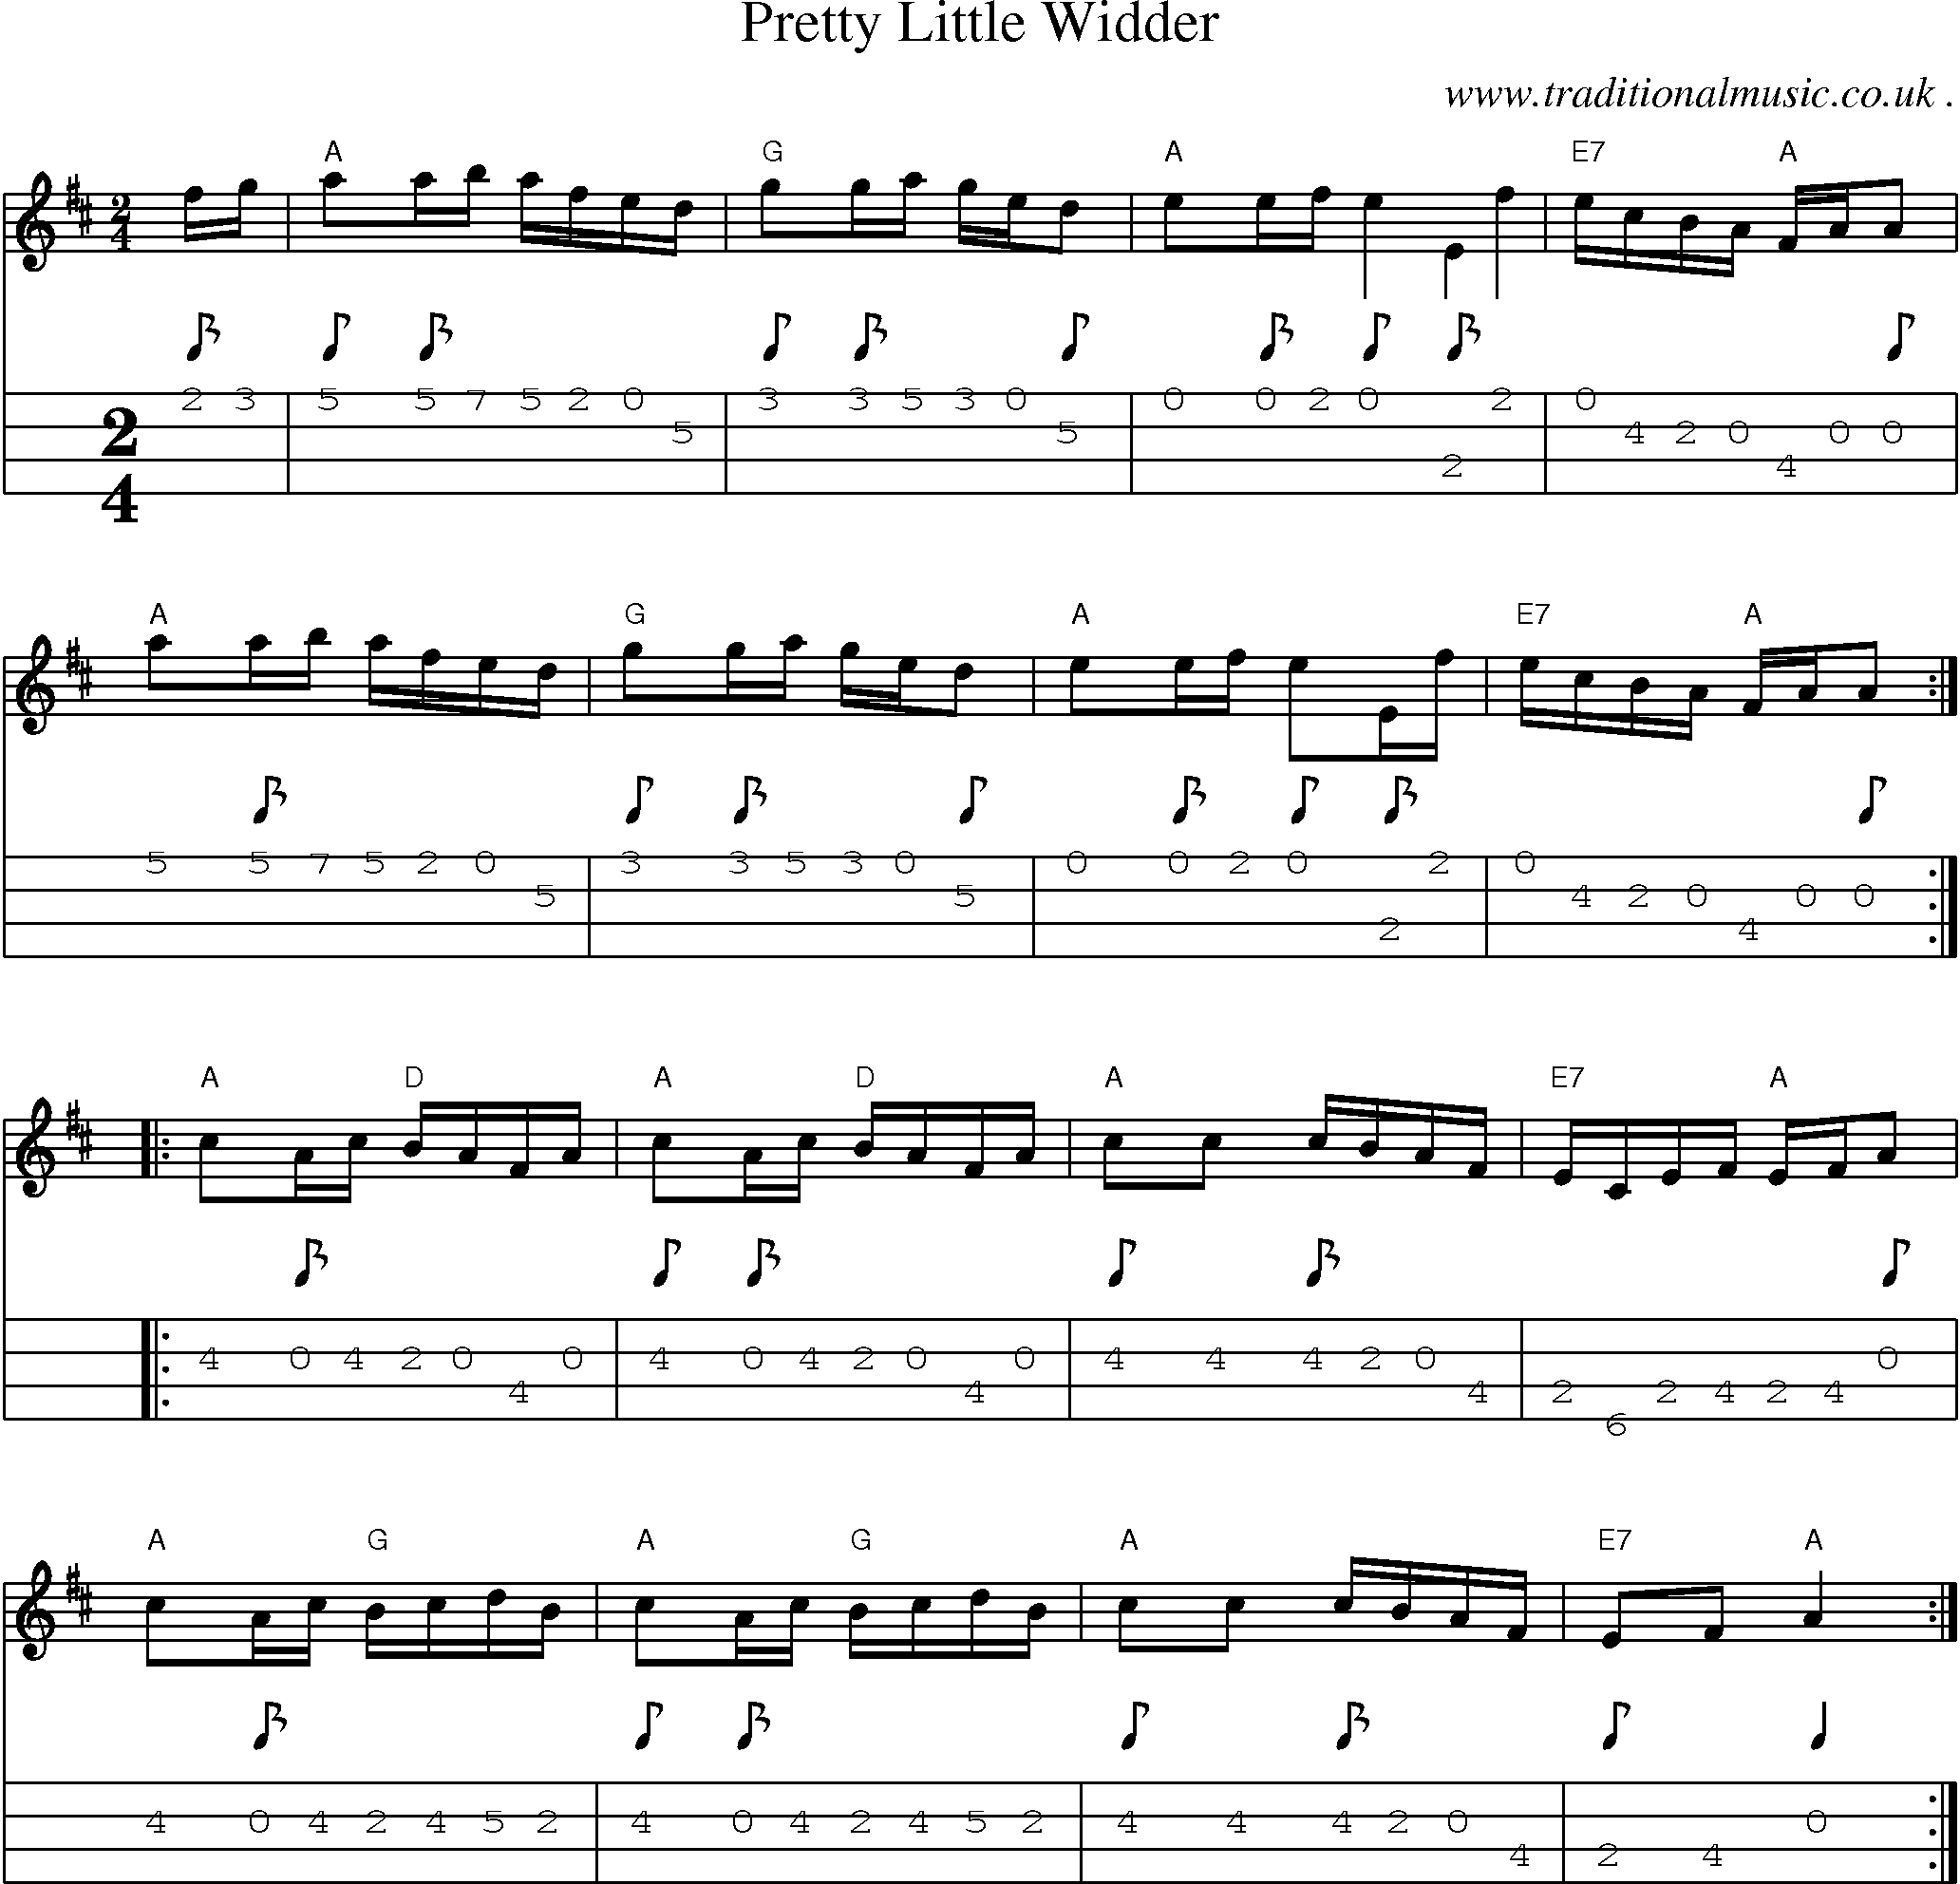 Music Score and Guitar Tabs for Pretty Little Widder